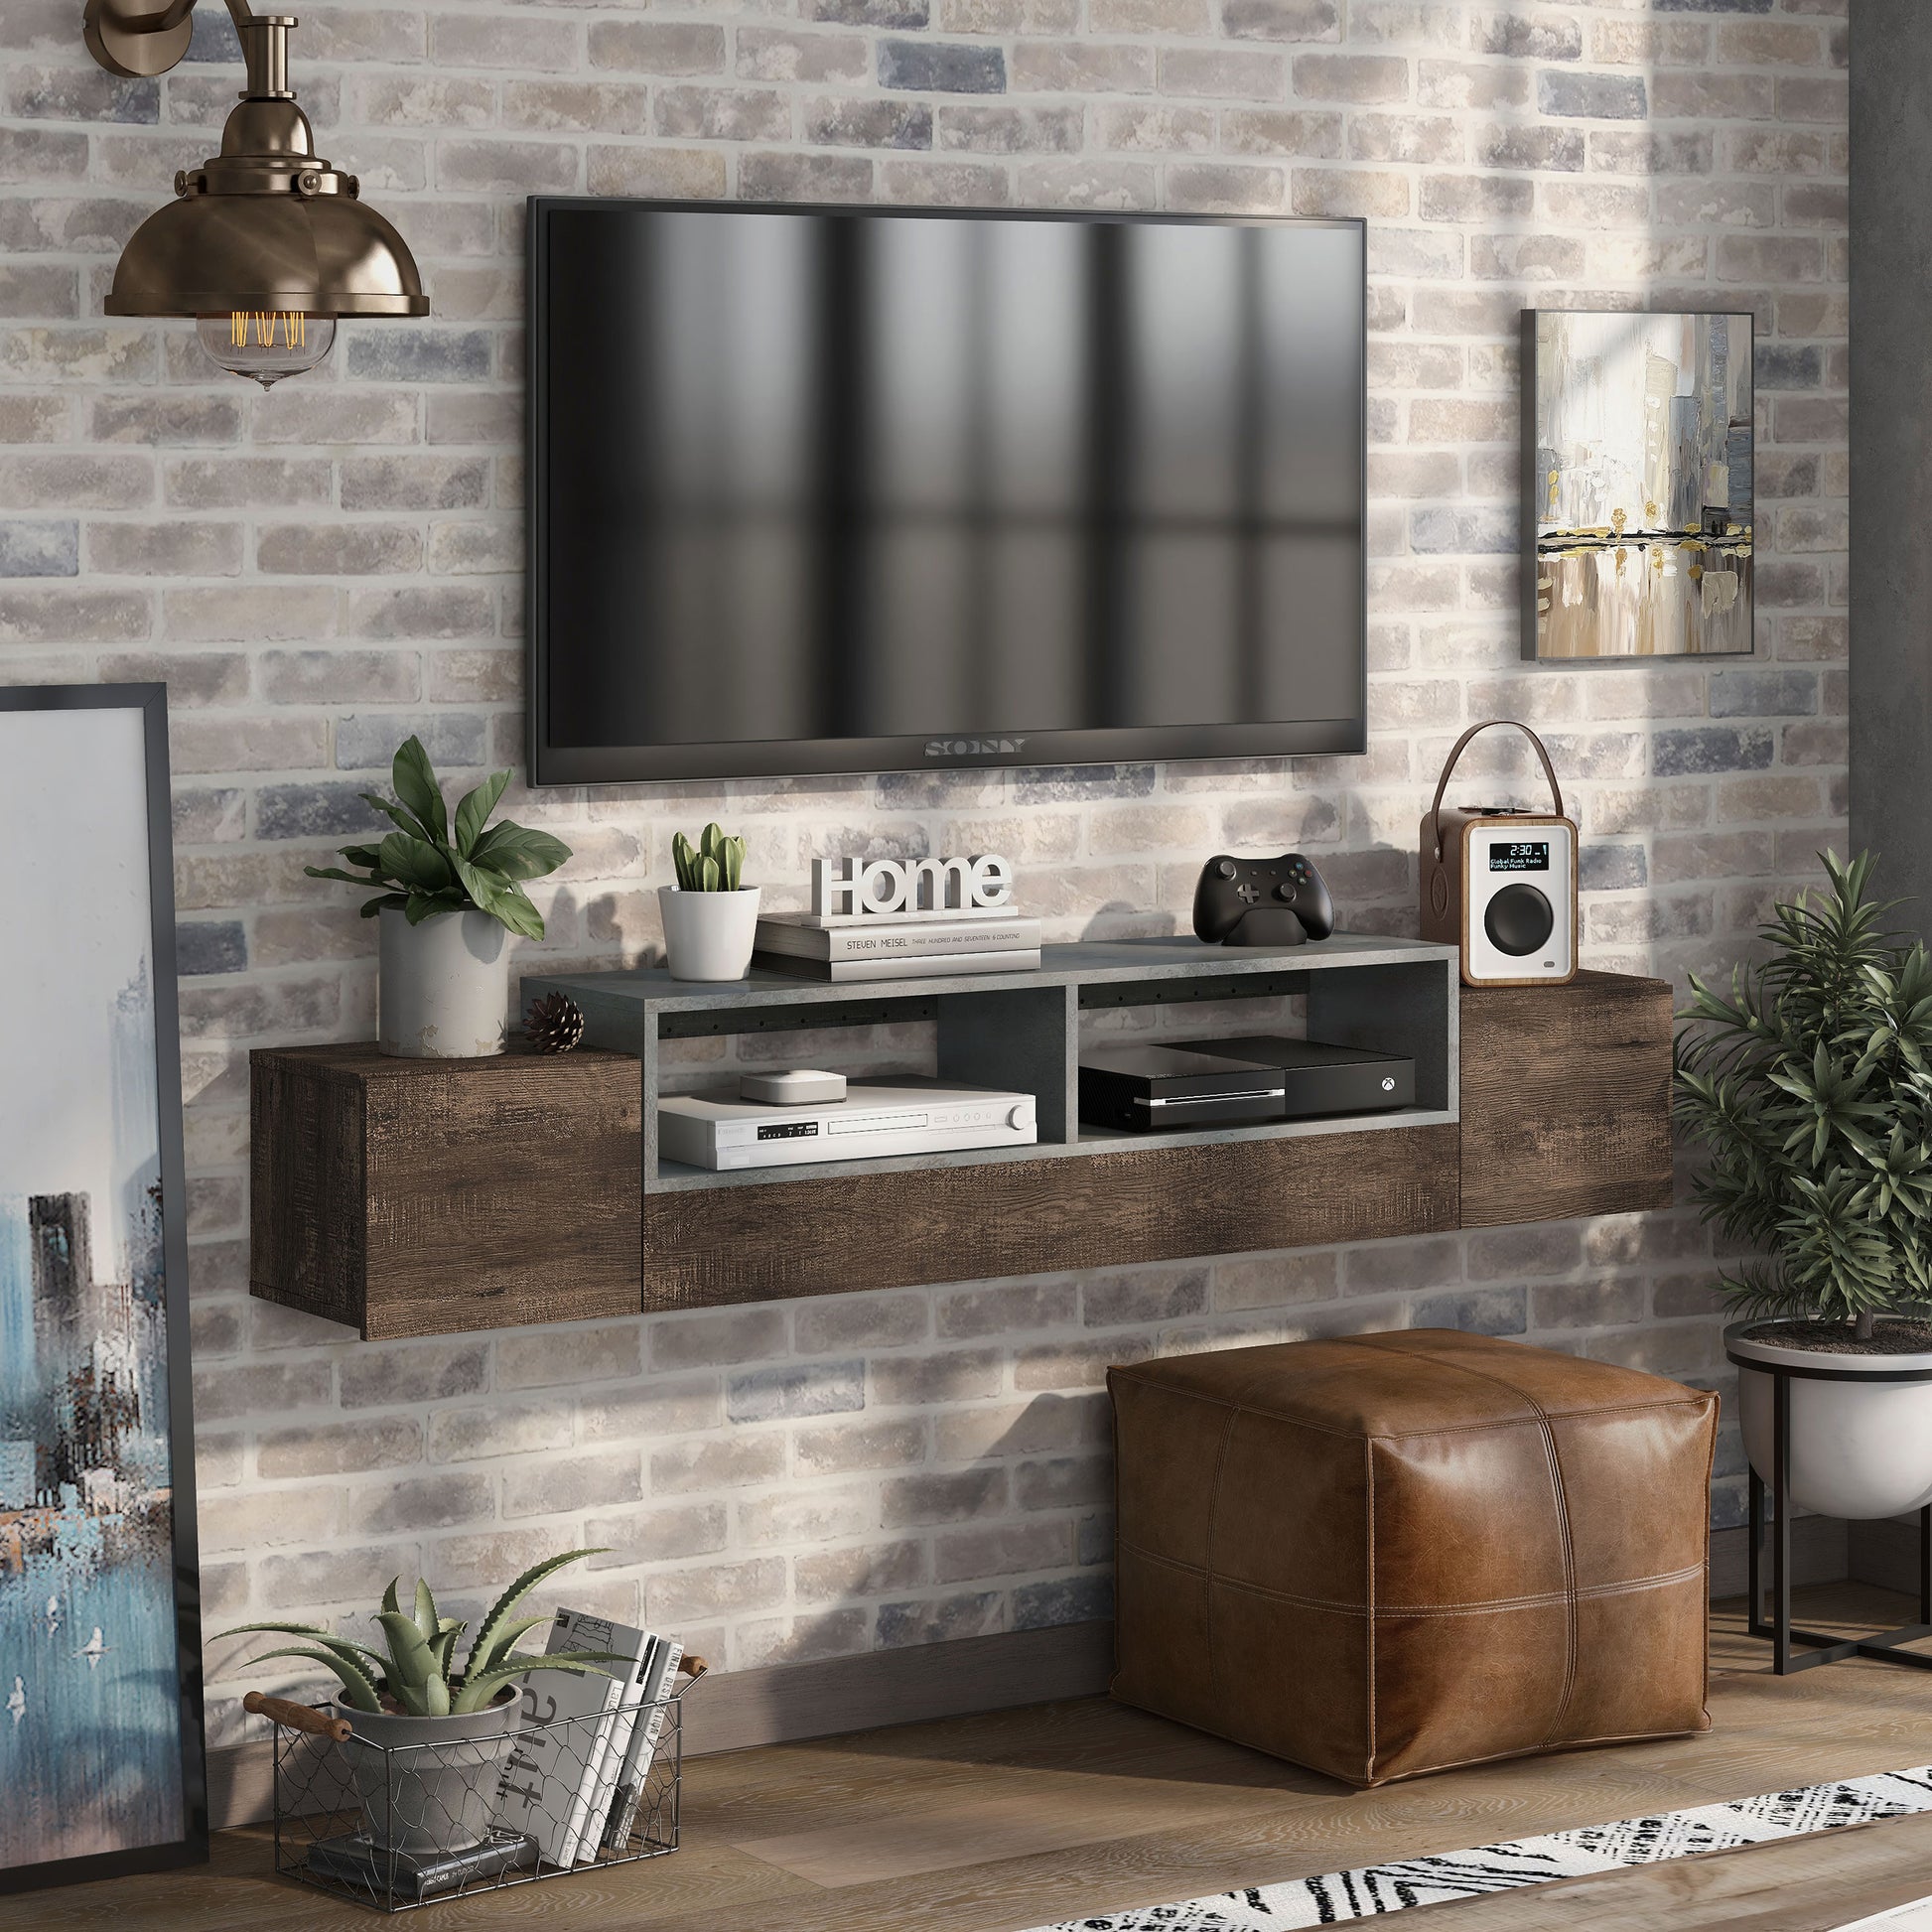 Right angled rustic reclaimed oak and gray wall mountable storage TV console in a living room with accessories